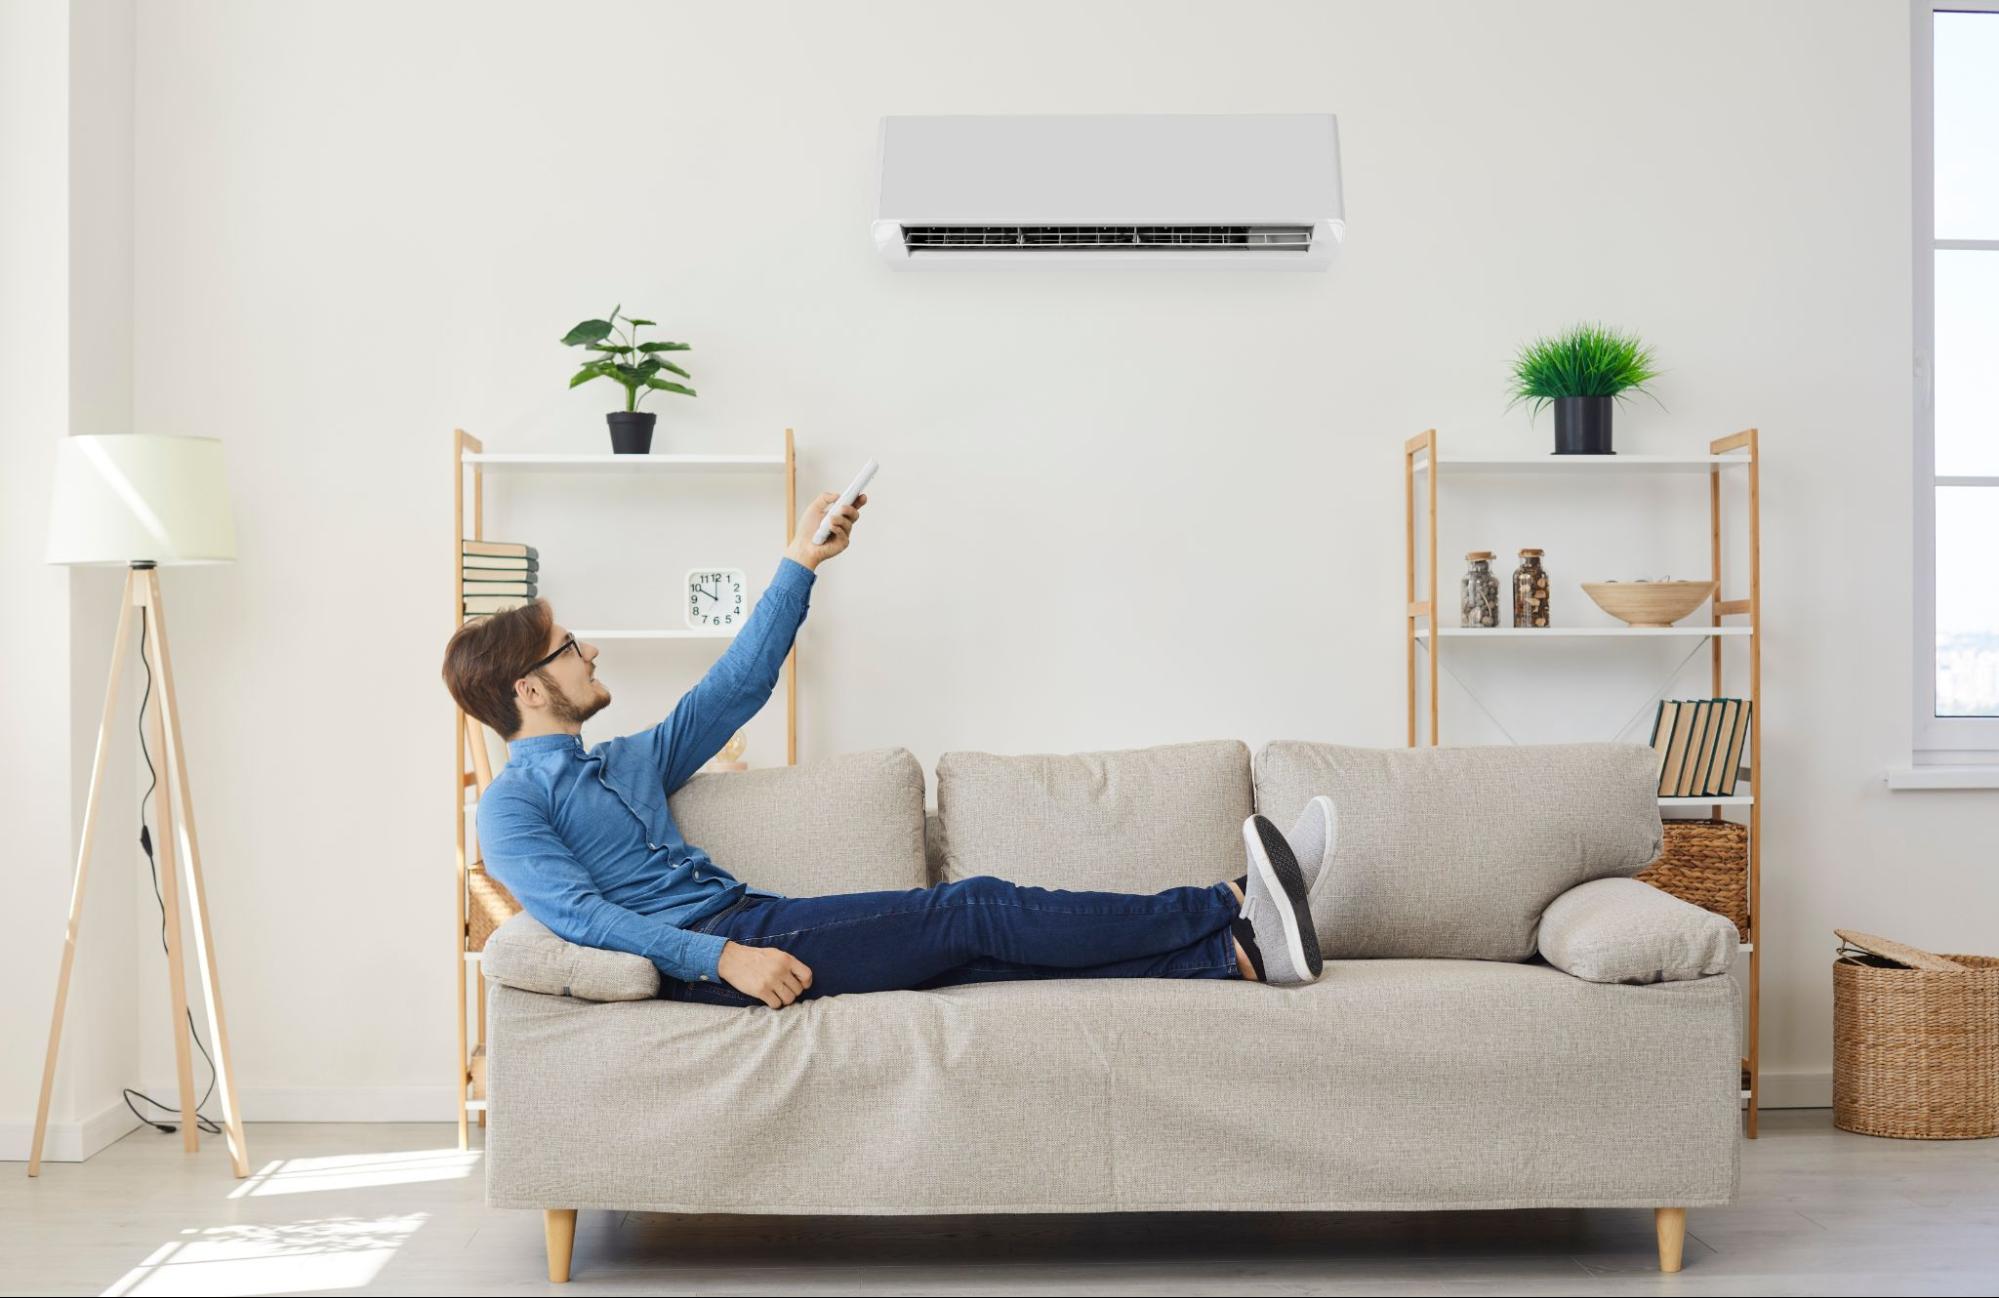 Man sitting on a couch turning on his central air conditioning with an HVAC remote